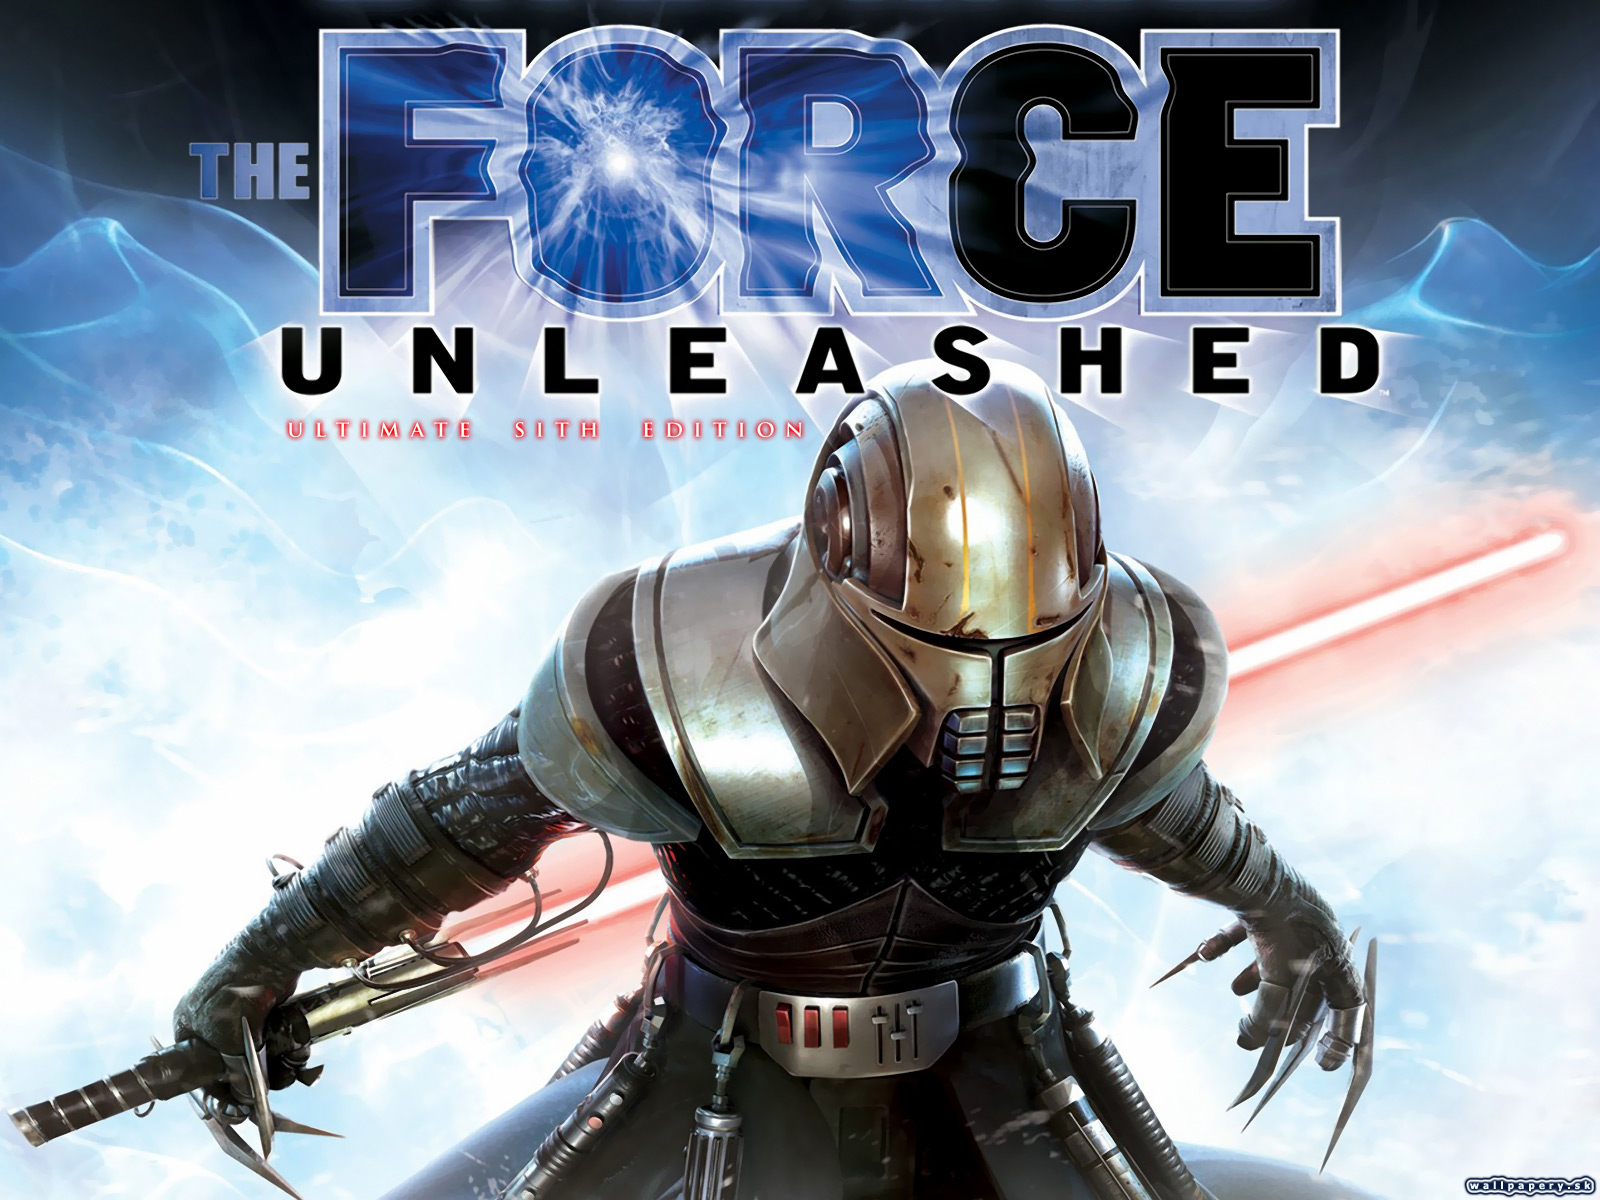 Star Wars: The Force Unleashed - Ultimate Sith Edition - wallpaper 4